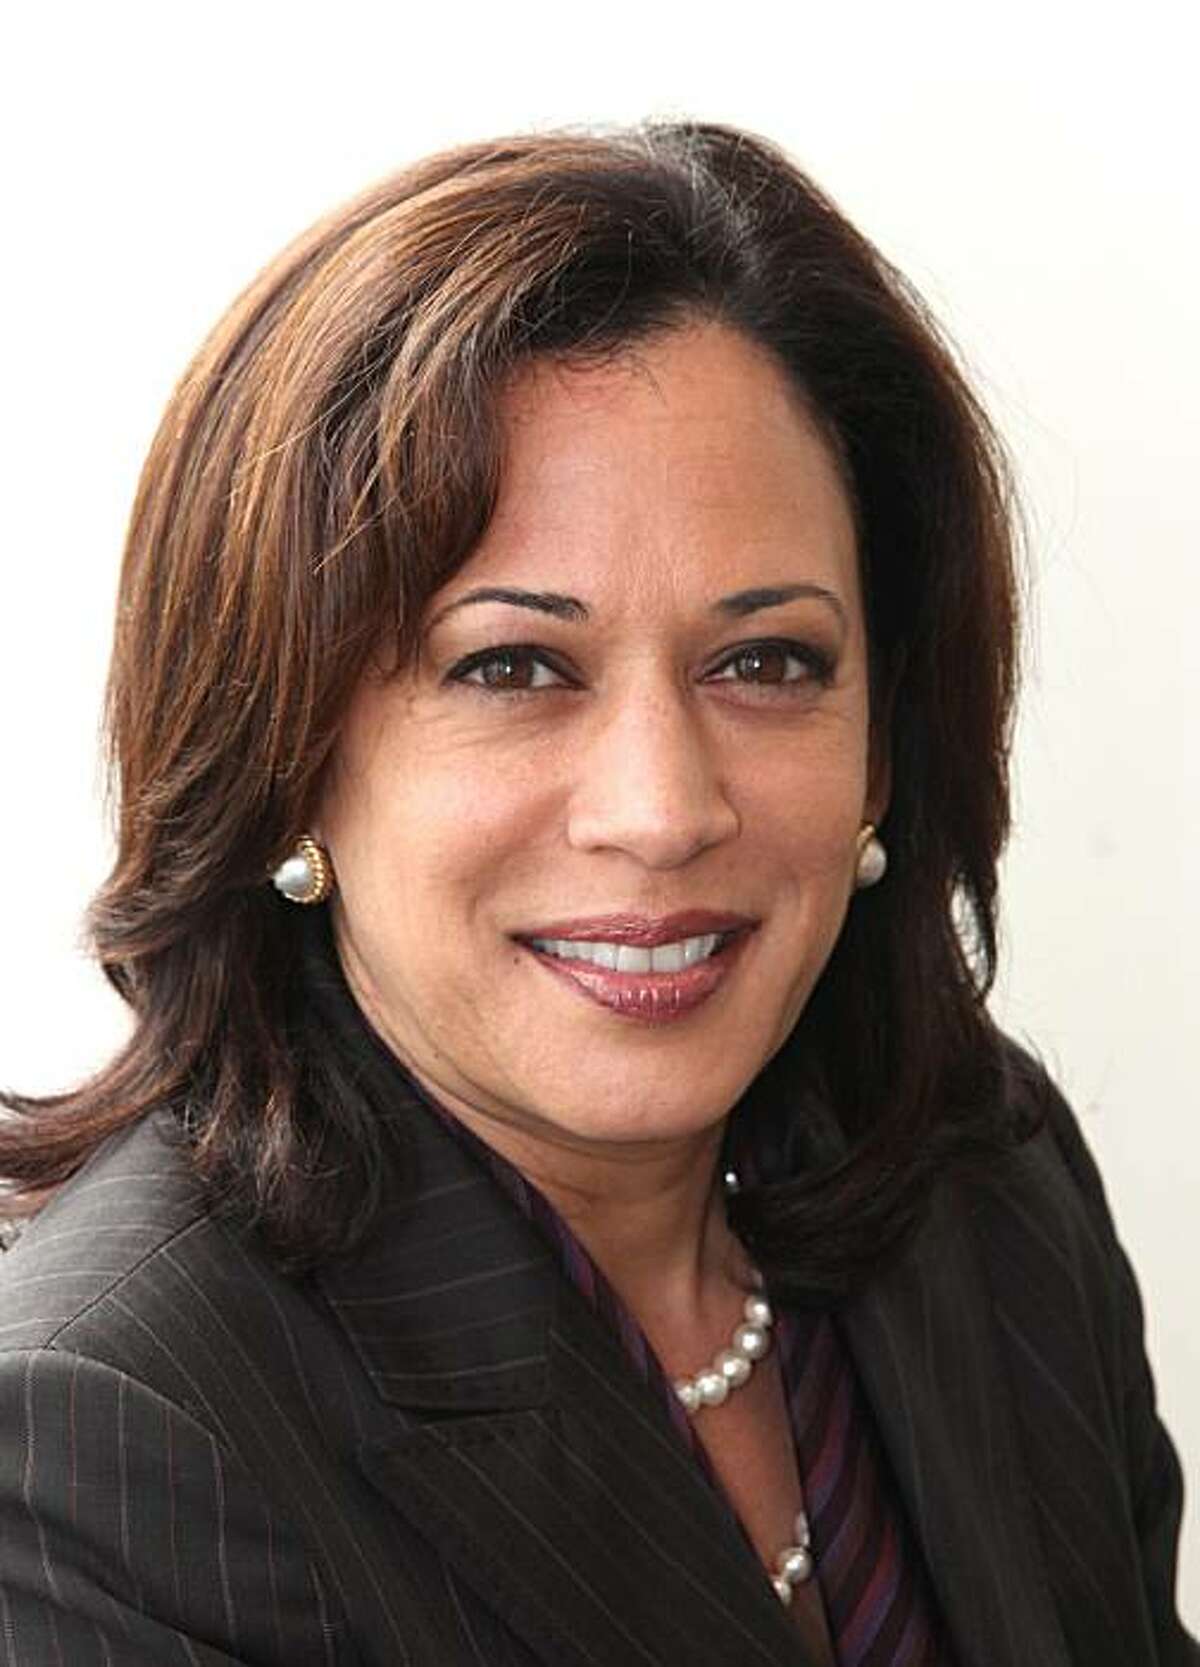 This Tuesday, April 20, 2010 photo shows San Francisco District Attorney Kamala Harris who is running for the Democratic nomination for Attorney General in the June 2010 primary, in Sacramento, Calif. (AP Photo/Rich Pedroncelli)